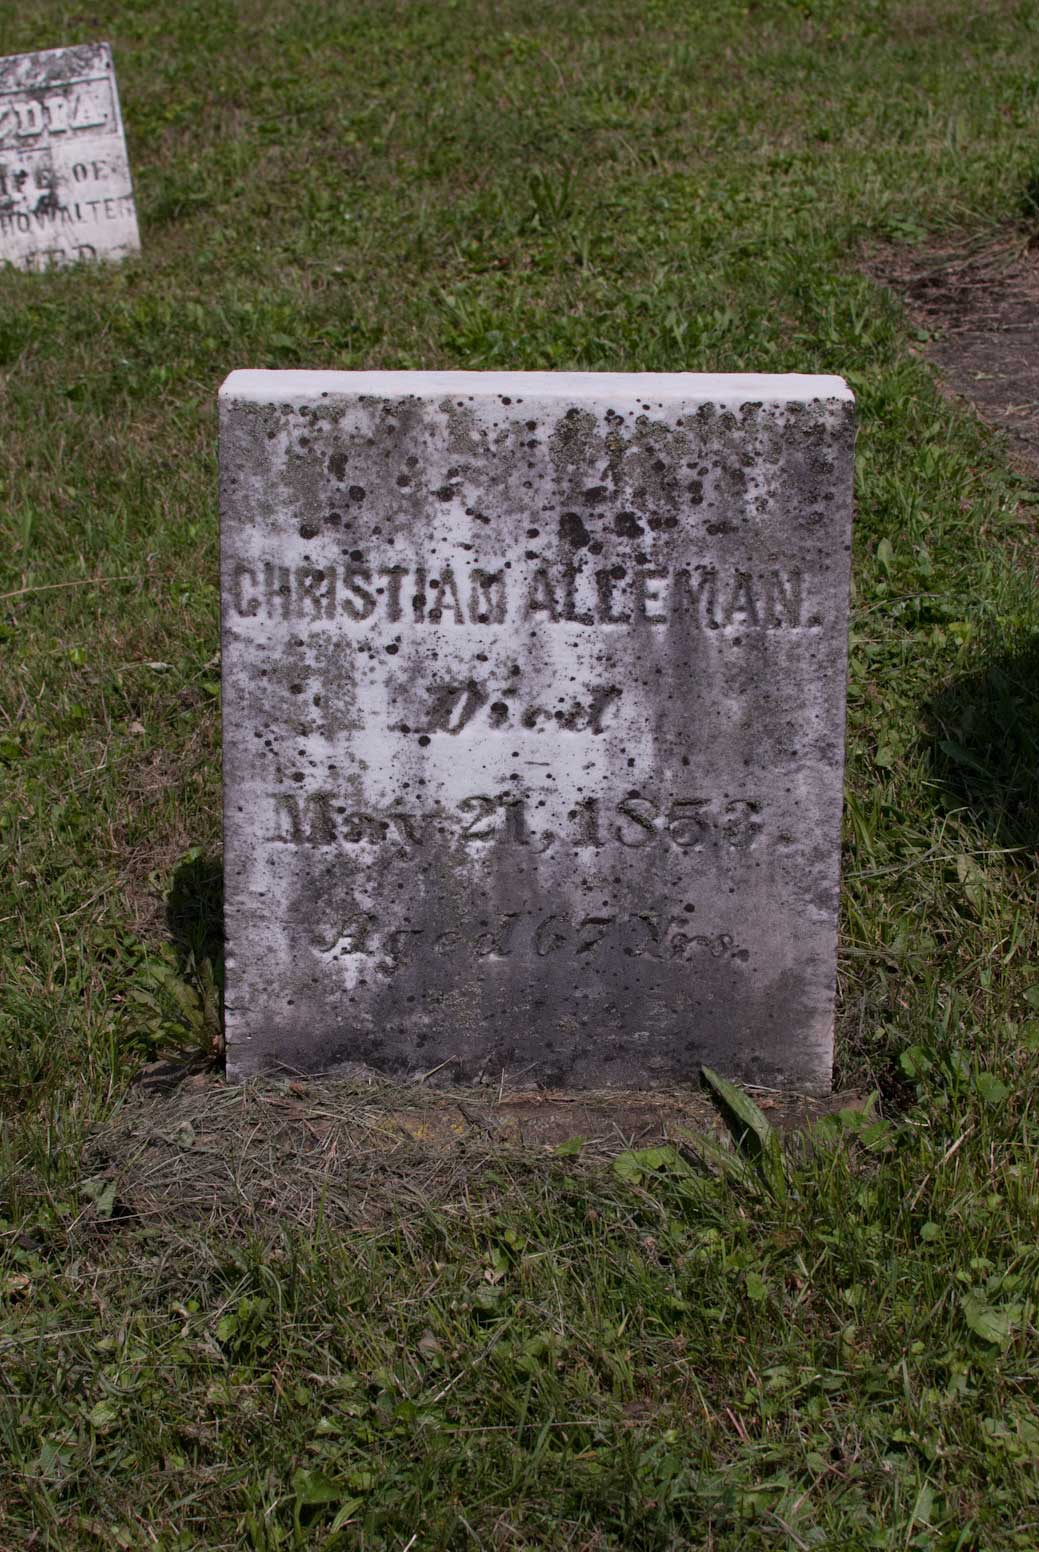 Christian Alleman, died May 21, 1853 - Aged 67 Yrs.